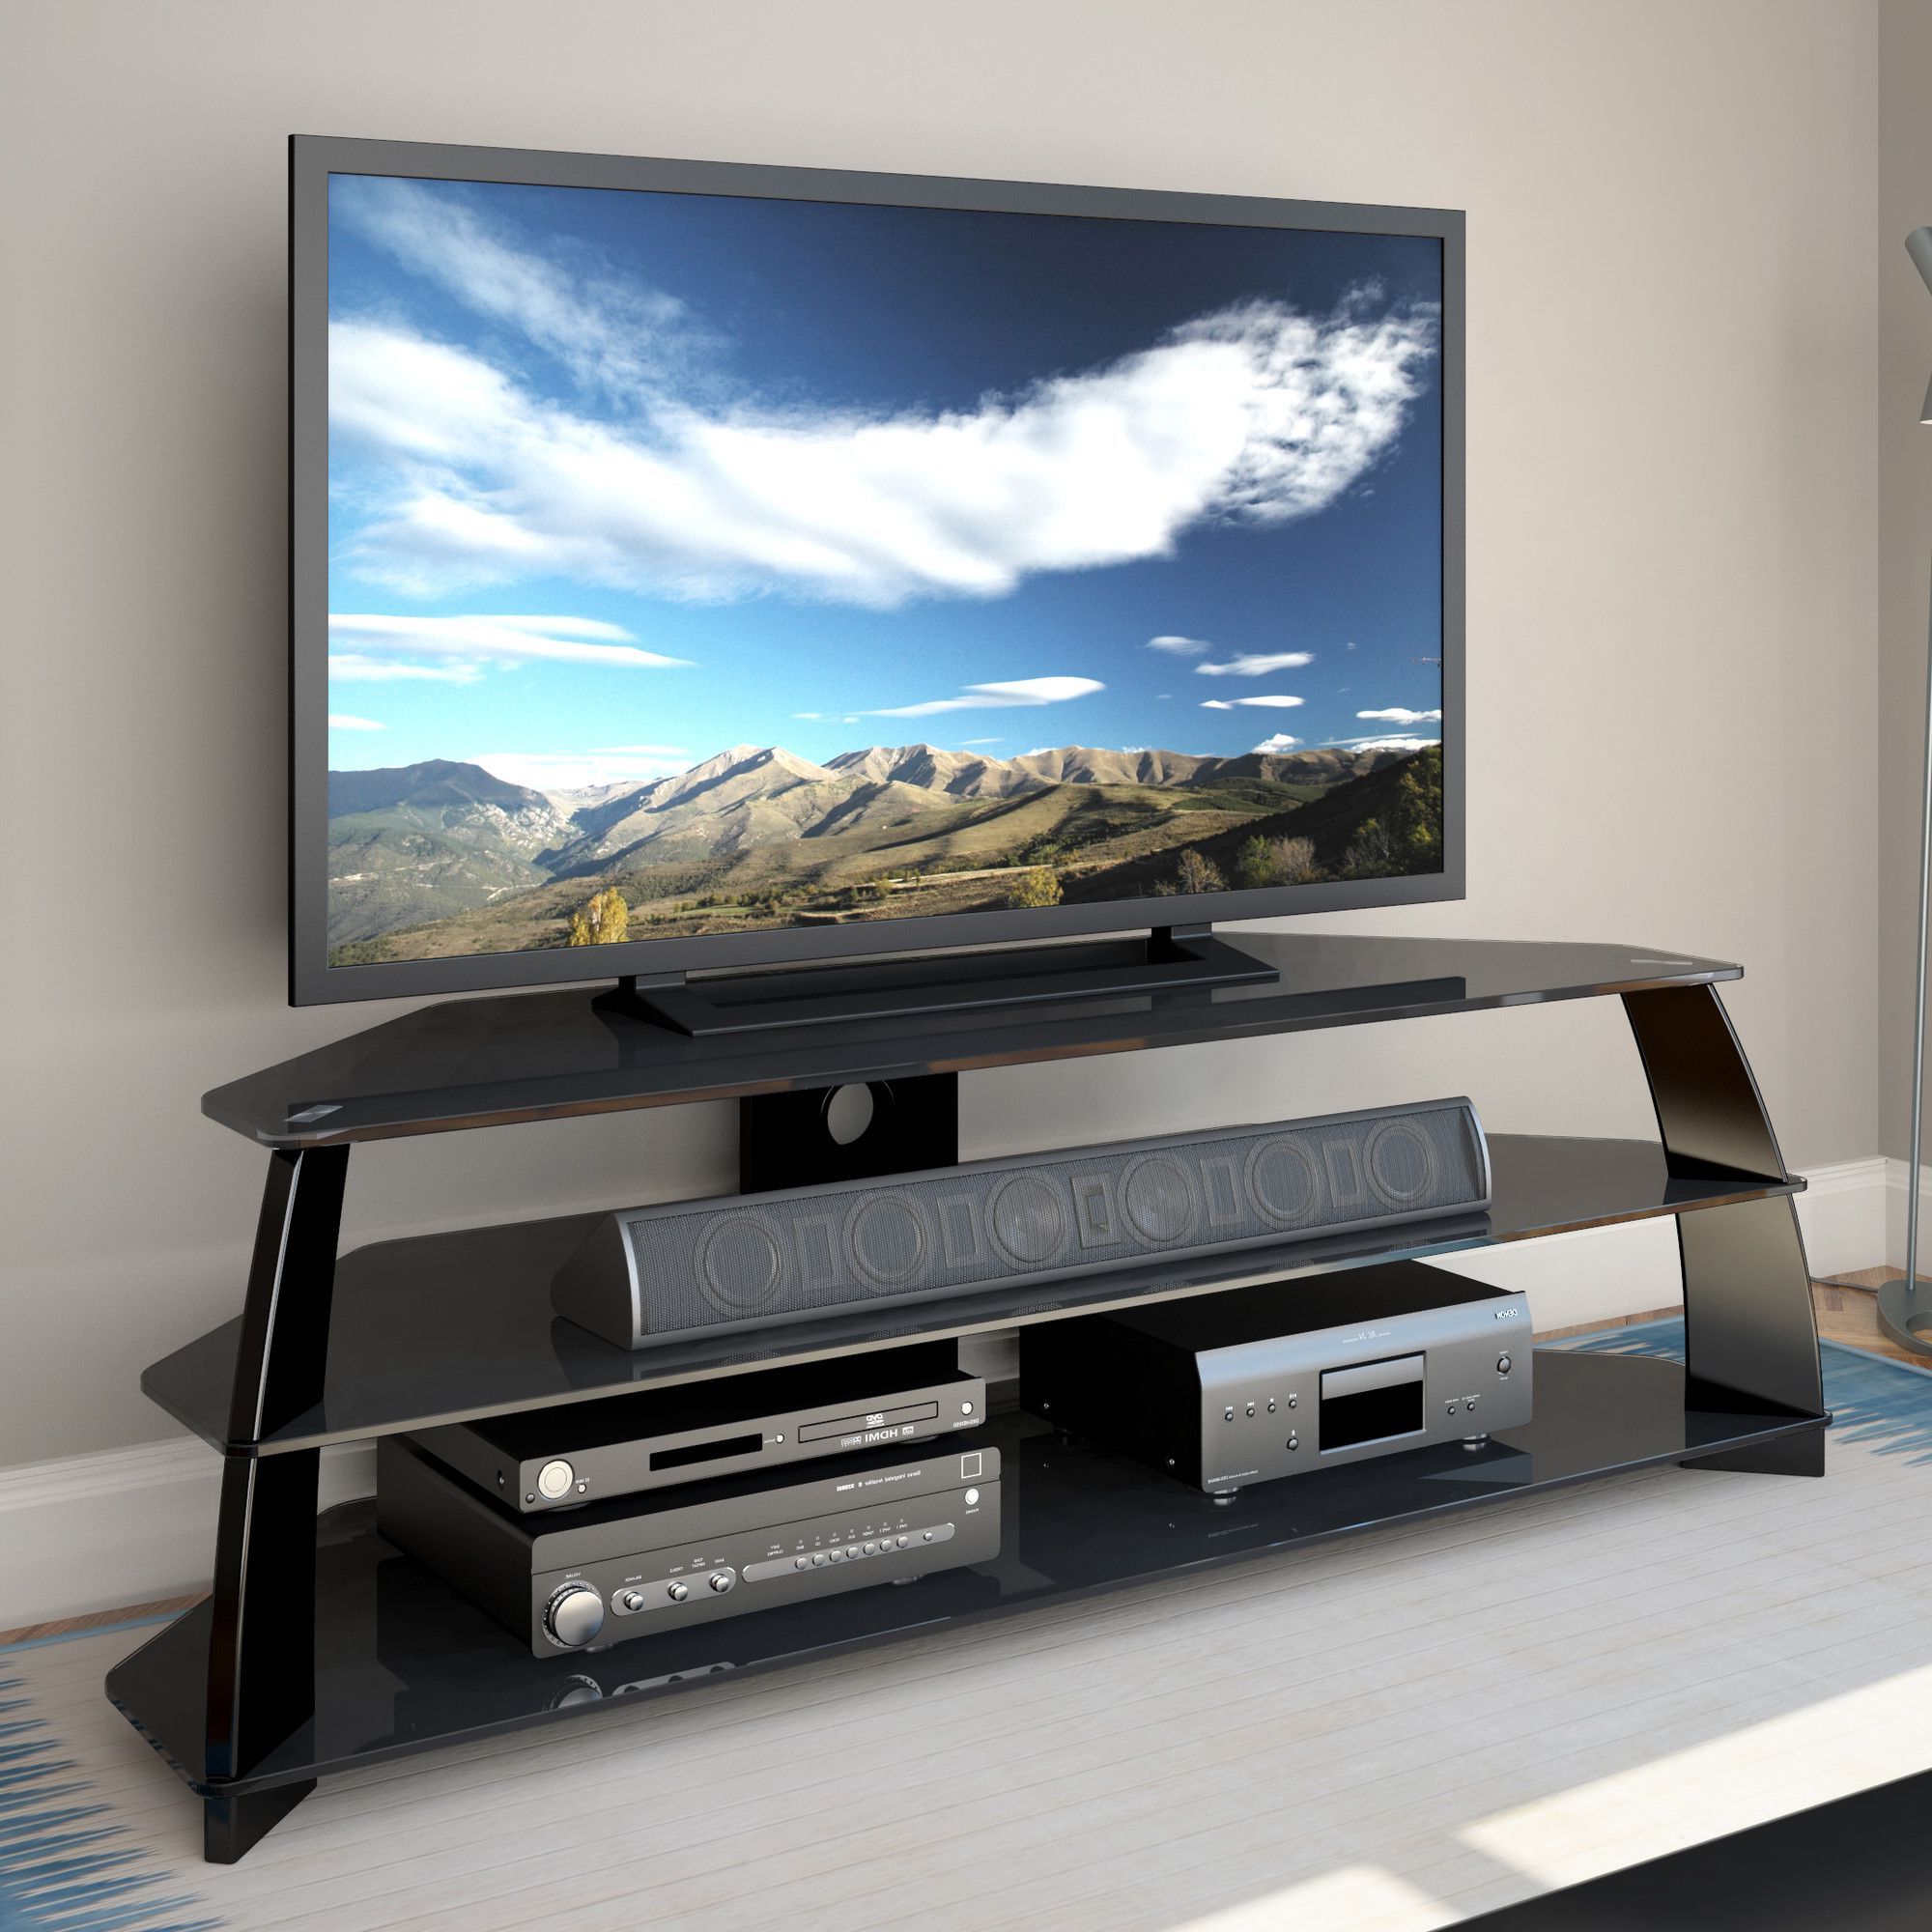 Online Home Store For Furniture, Decor, Outdoors & More Within Valenti Tv Stands For Tvs Up To 65" (View 8 of 20)